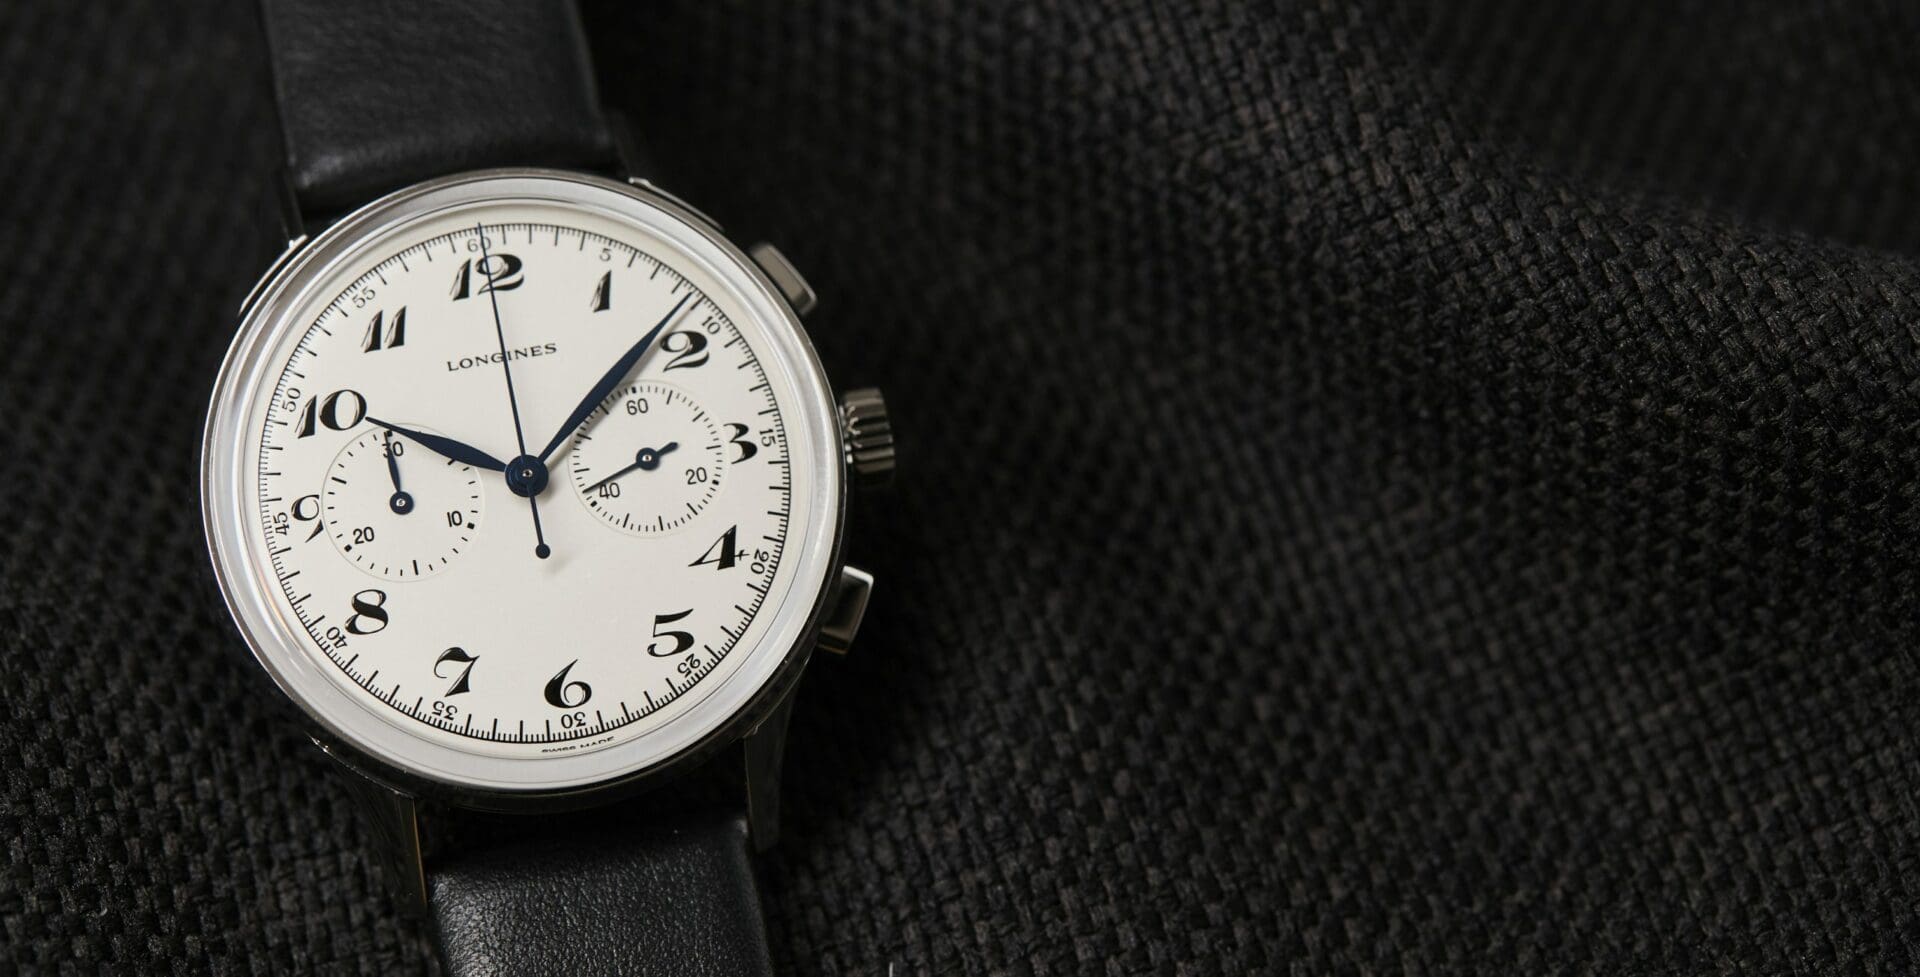 HANDS-ON: The Longines Heritage Classic Chronograph 1946, a modern-sized vintage charmer with heft